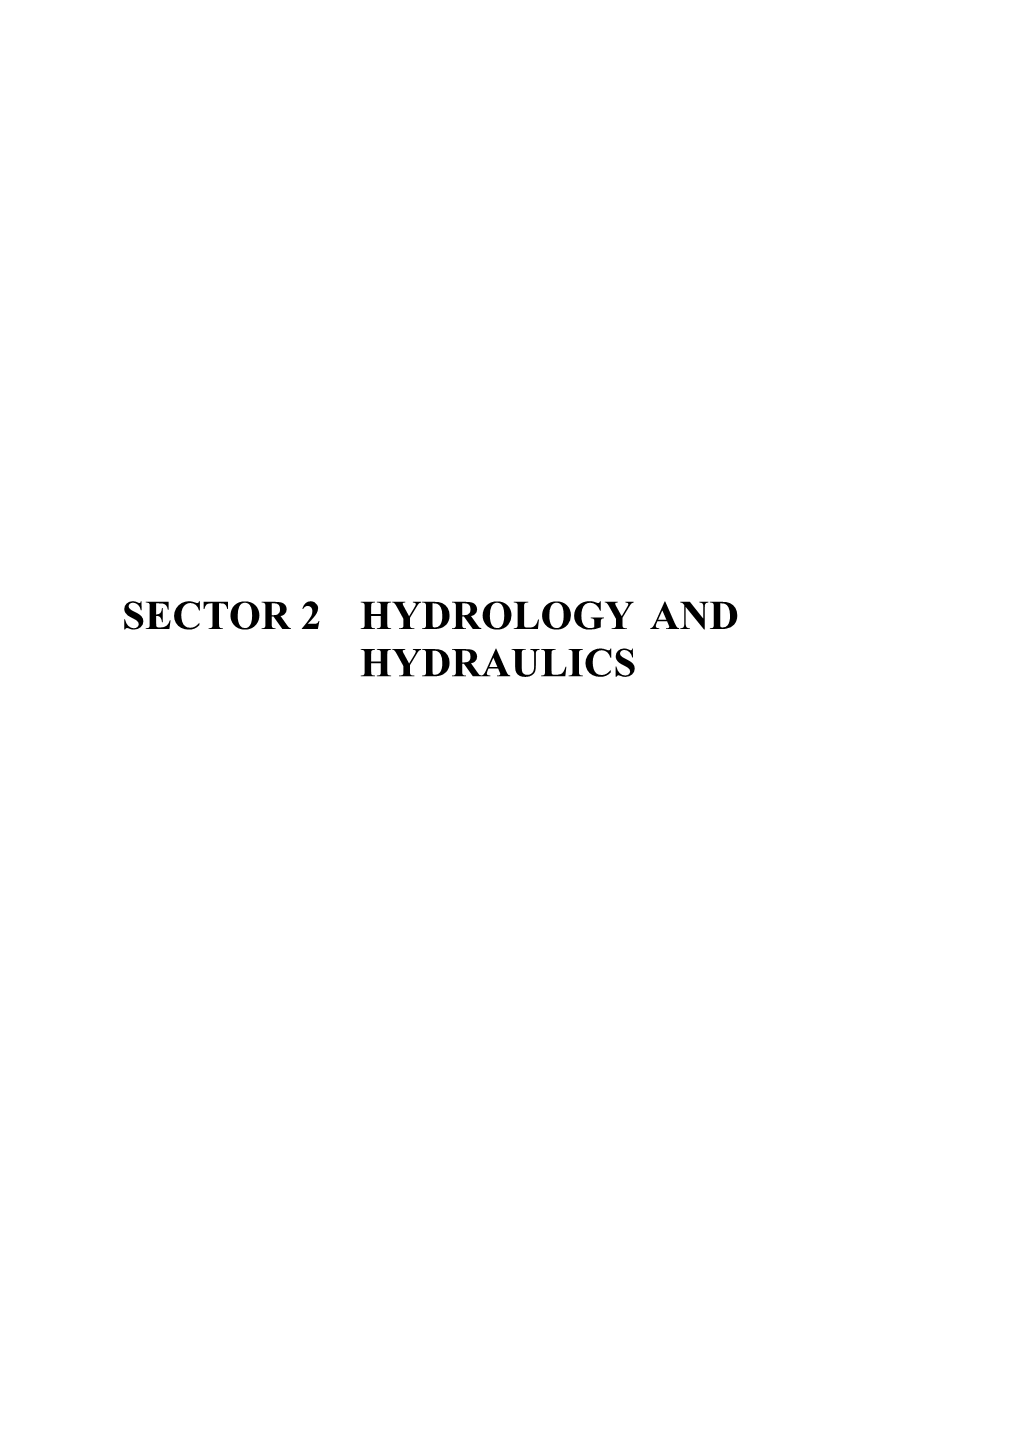 Sector 2 Hydrology and Hydraulics